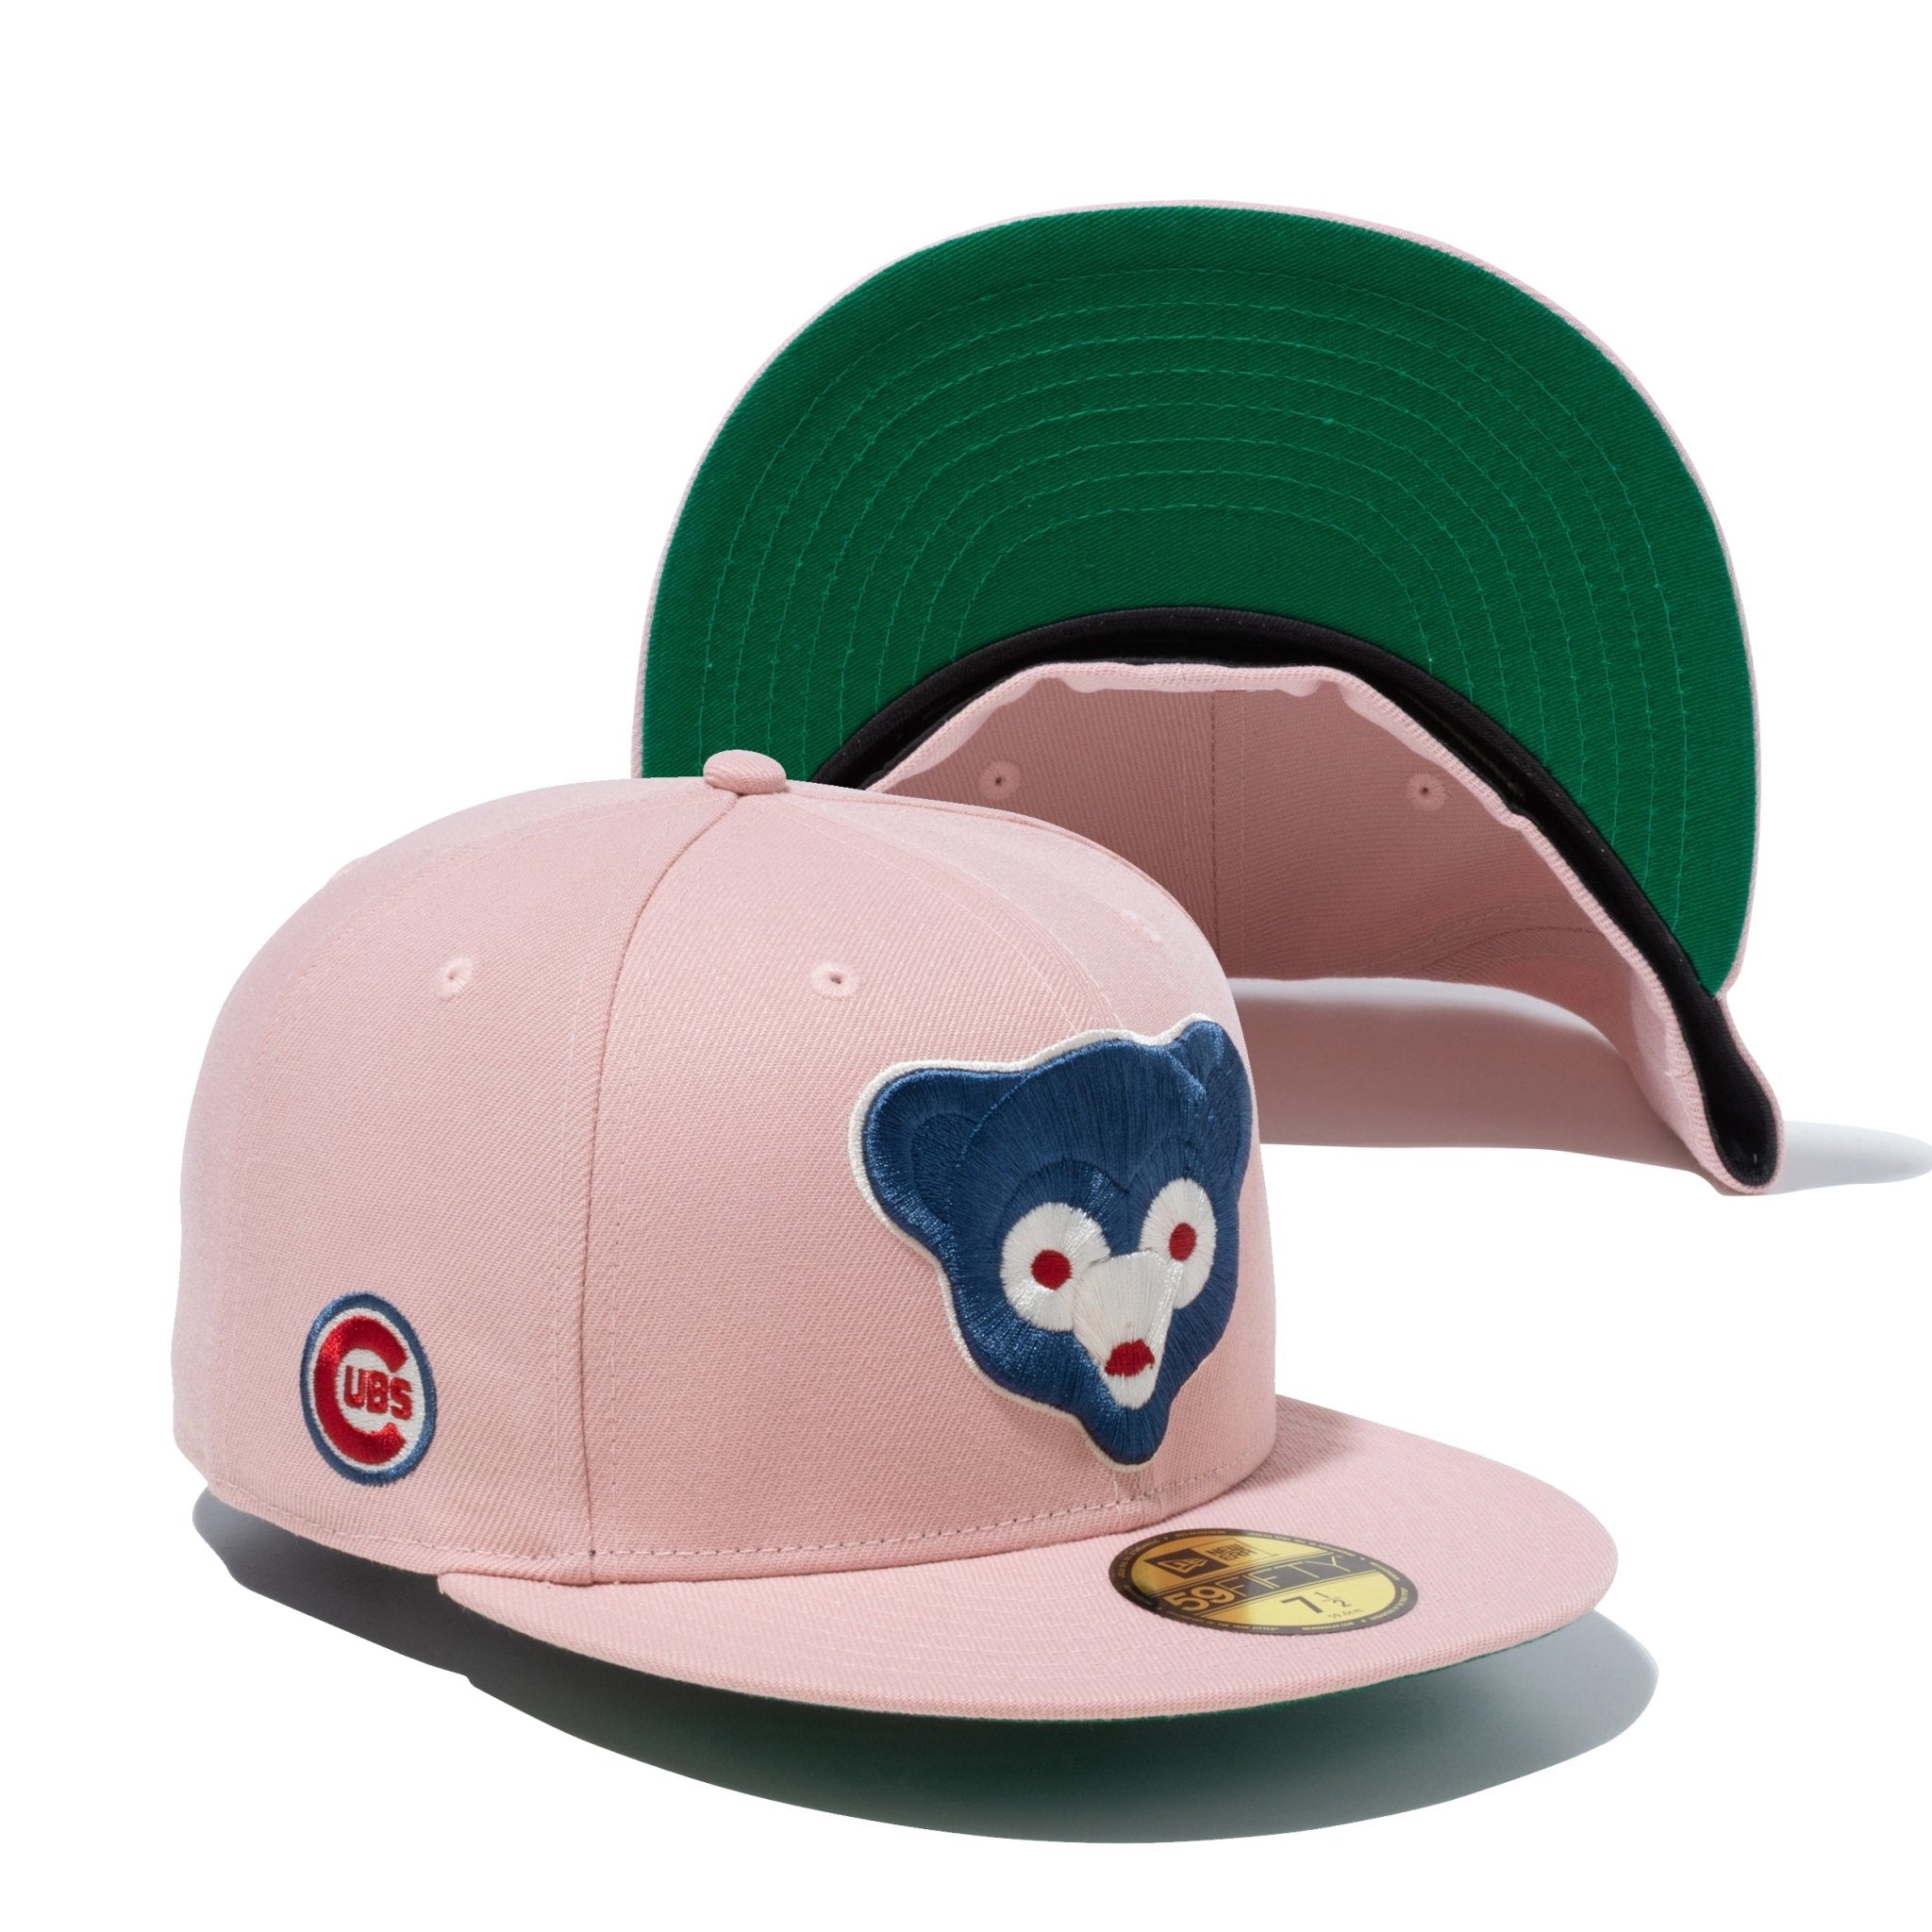 59FIFTY Pink Rouge クーパーズタウン シカゴ・カブス ピンク 